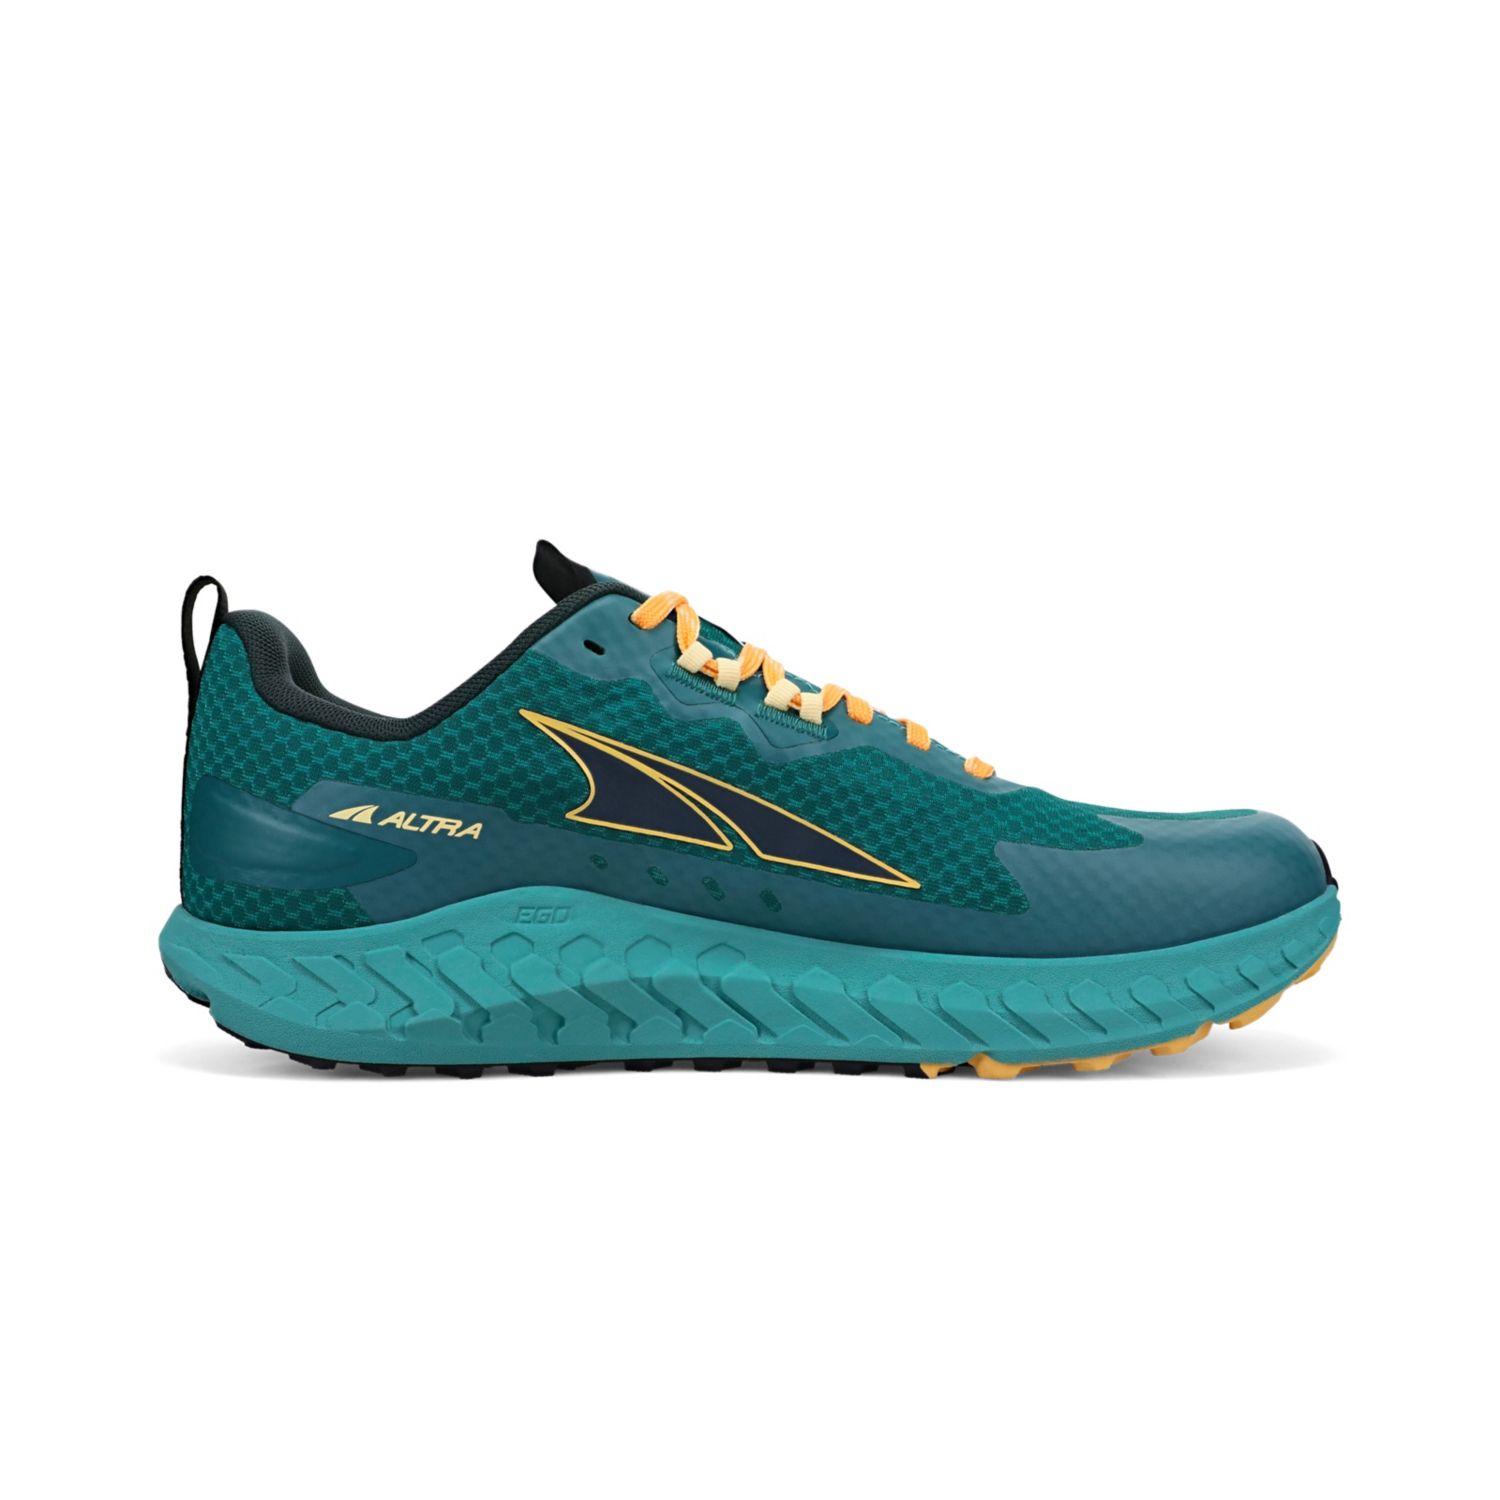 Deep Turquoise Altra Outroad Men's Road Running Shoes | Ireland-81675039